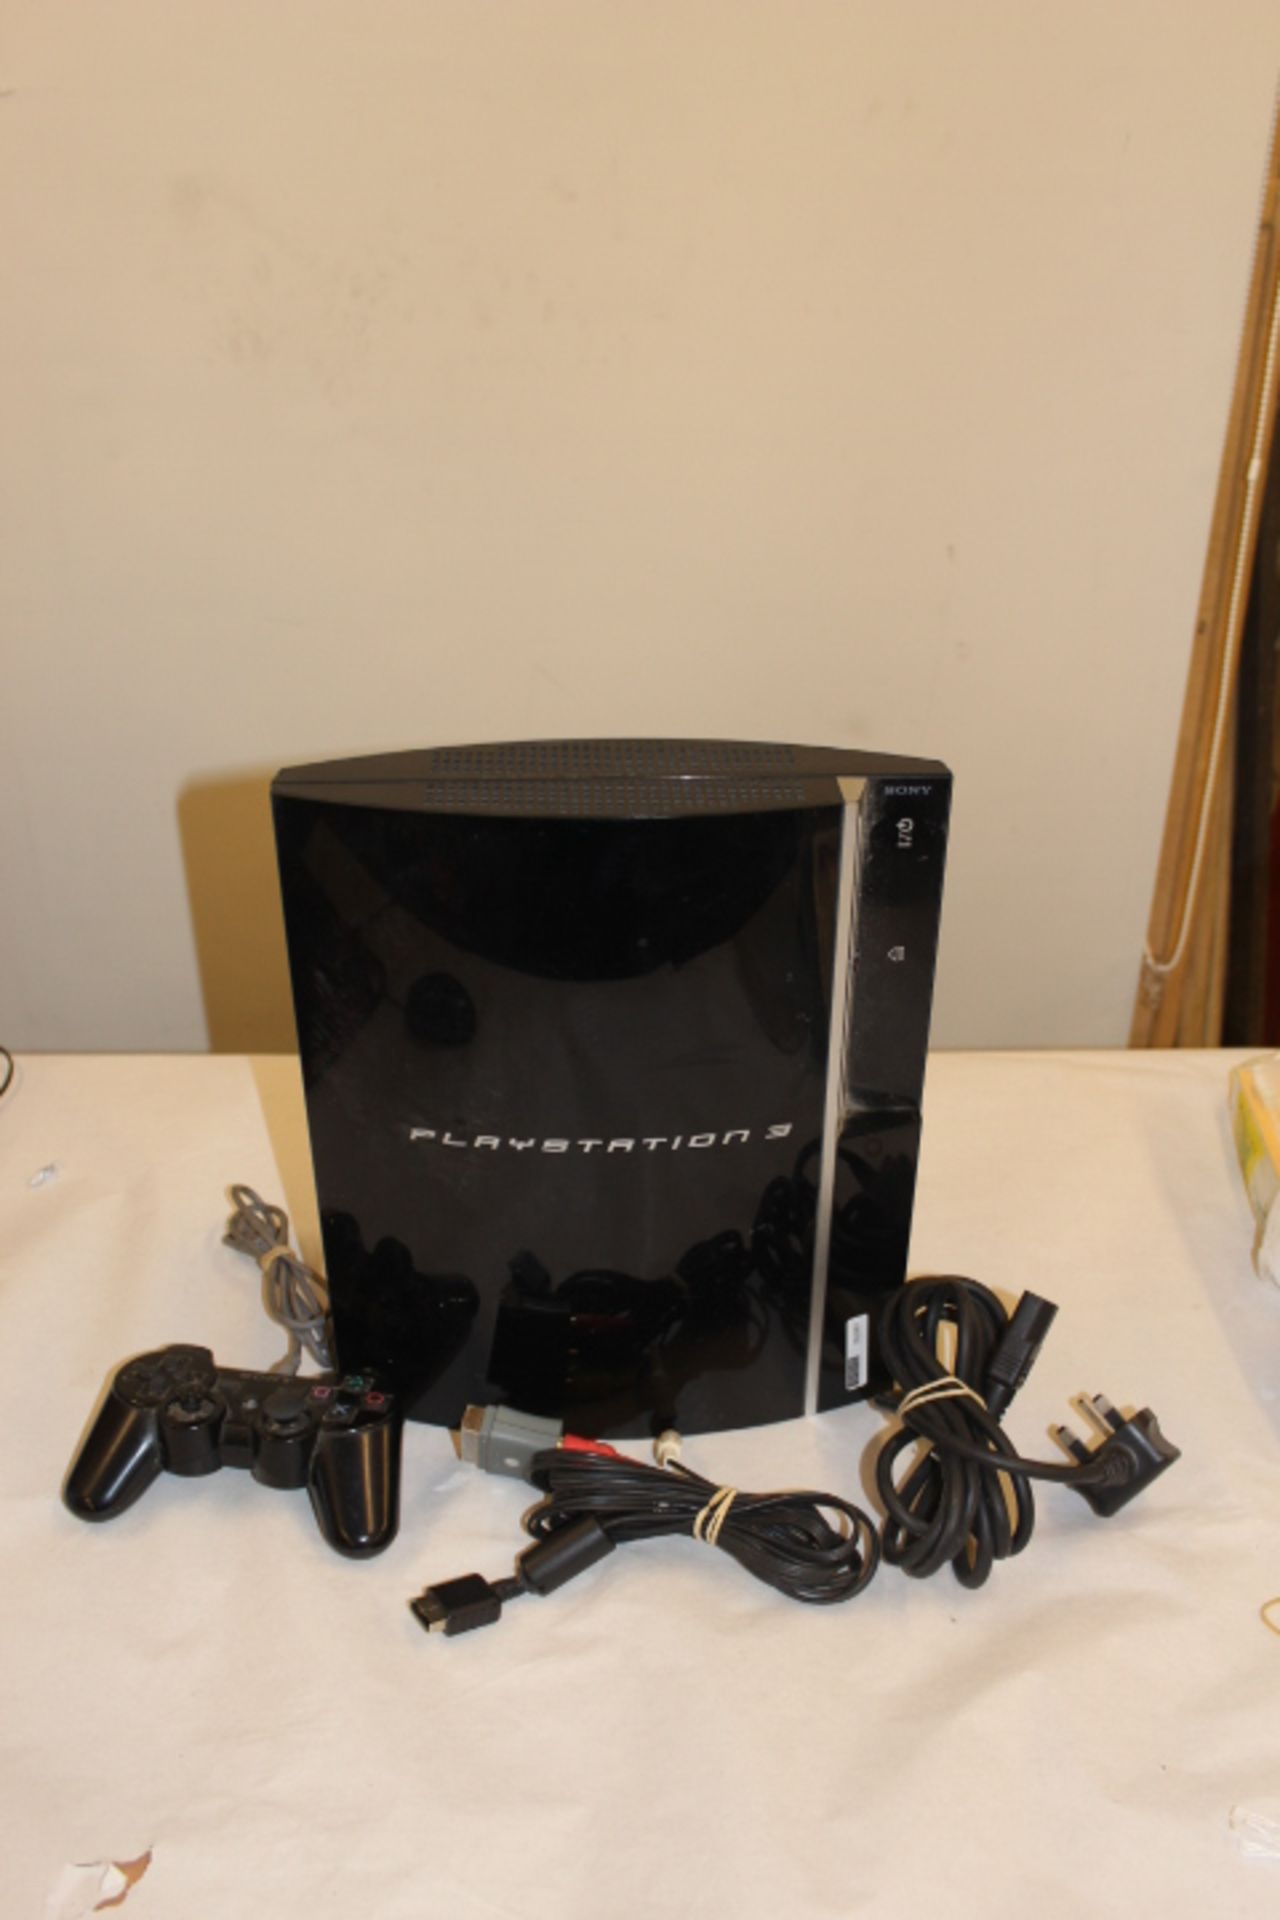 Sony Playstation 3 With Leads